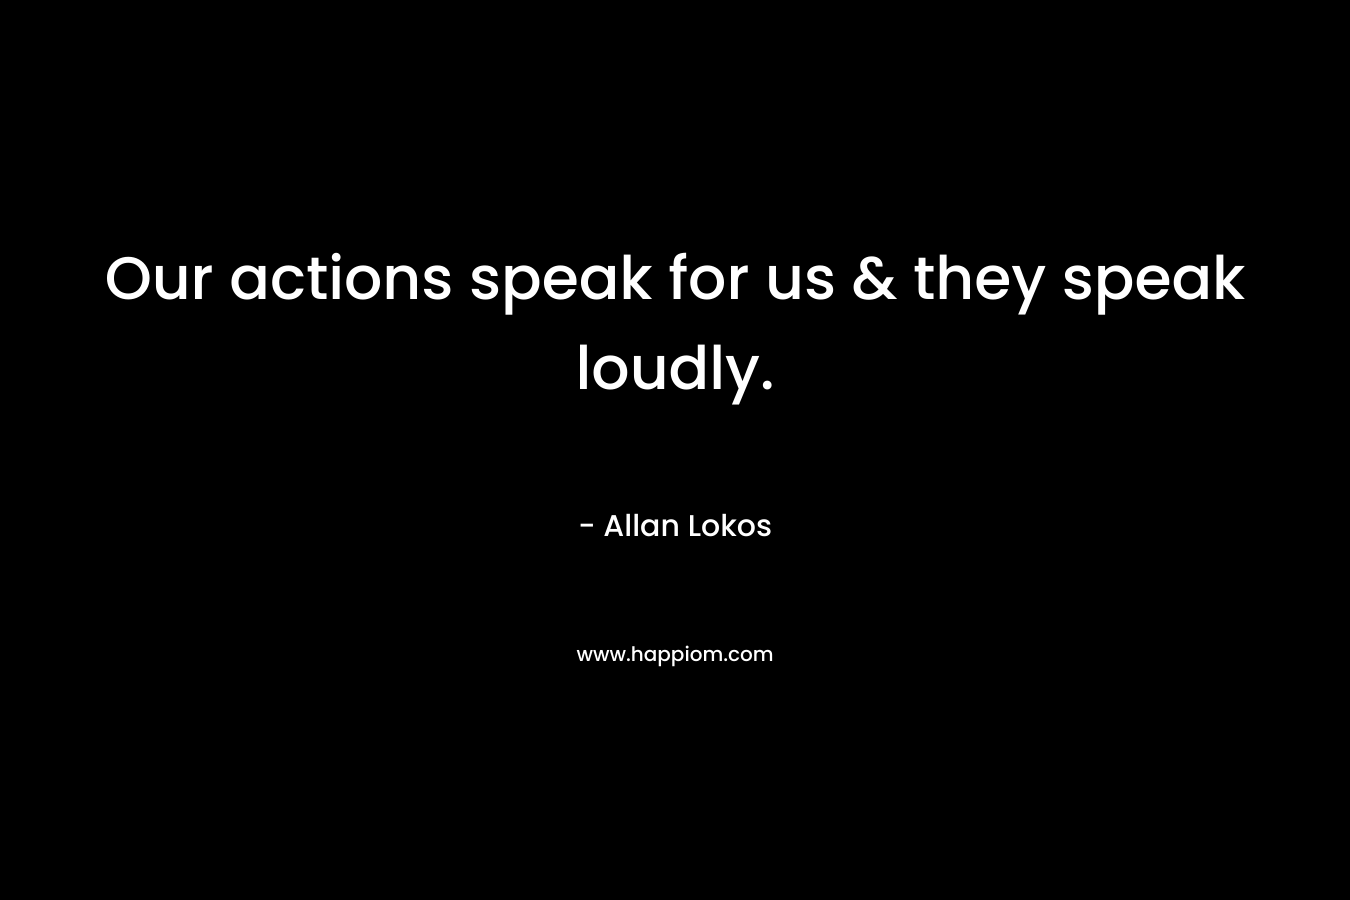 Our actions speak for us & they speak loudly.